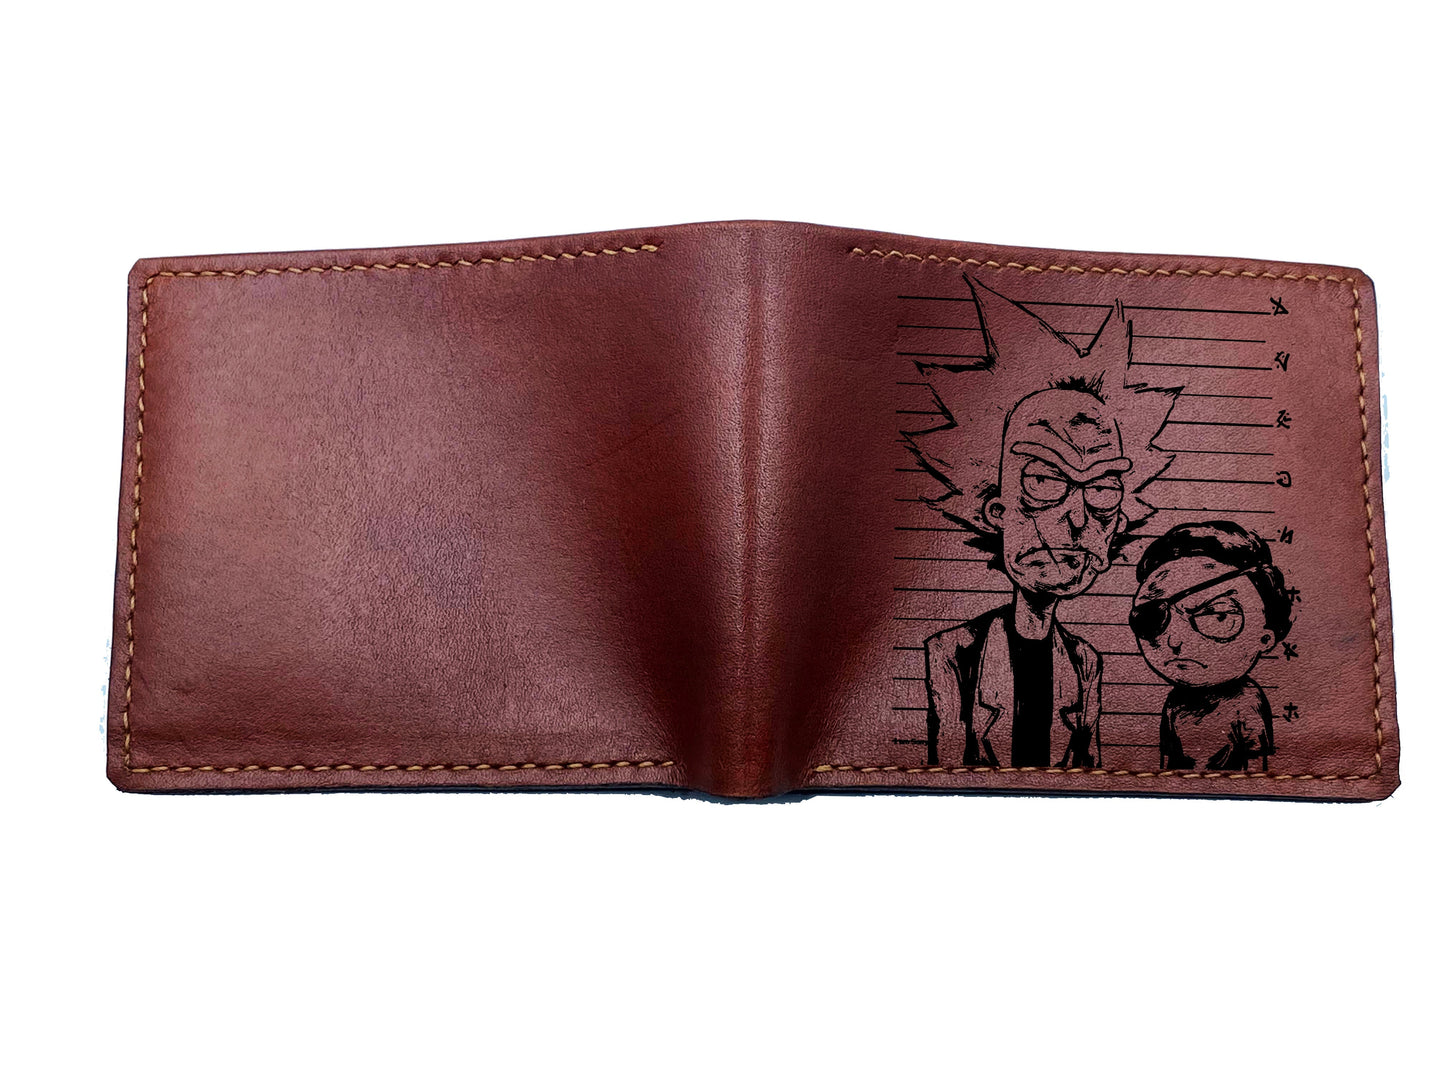 Mayan Corner - Rick and Morty movie series characters leather men's wallet, cartoon art wallet, cool leather gift for him - RM280103